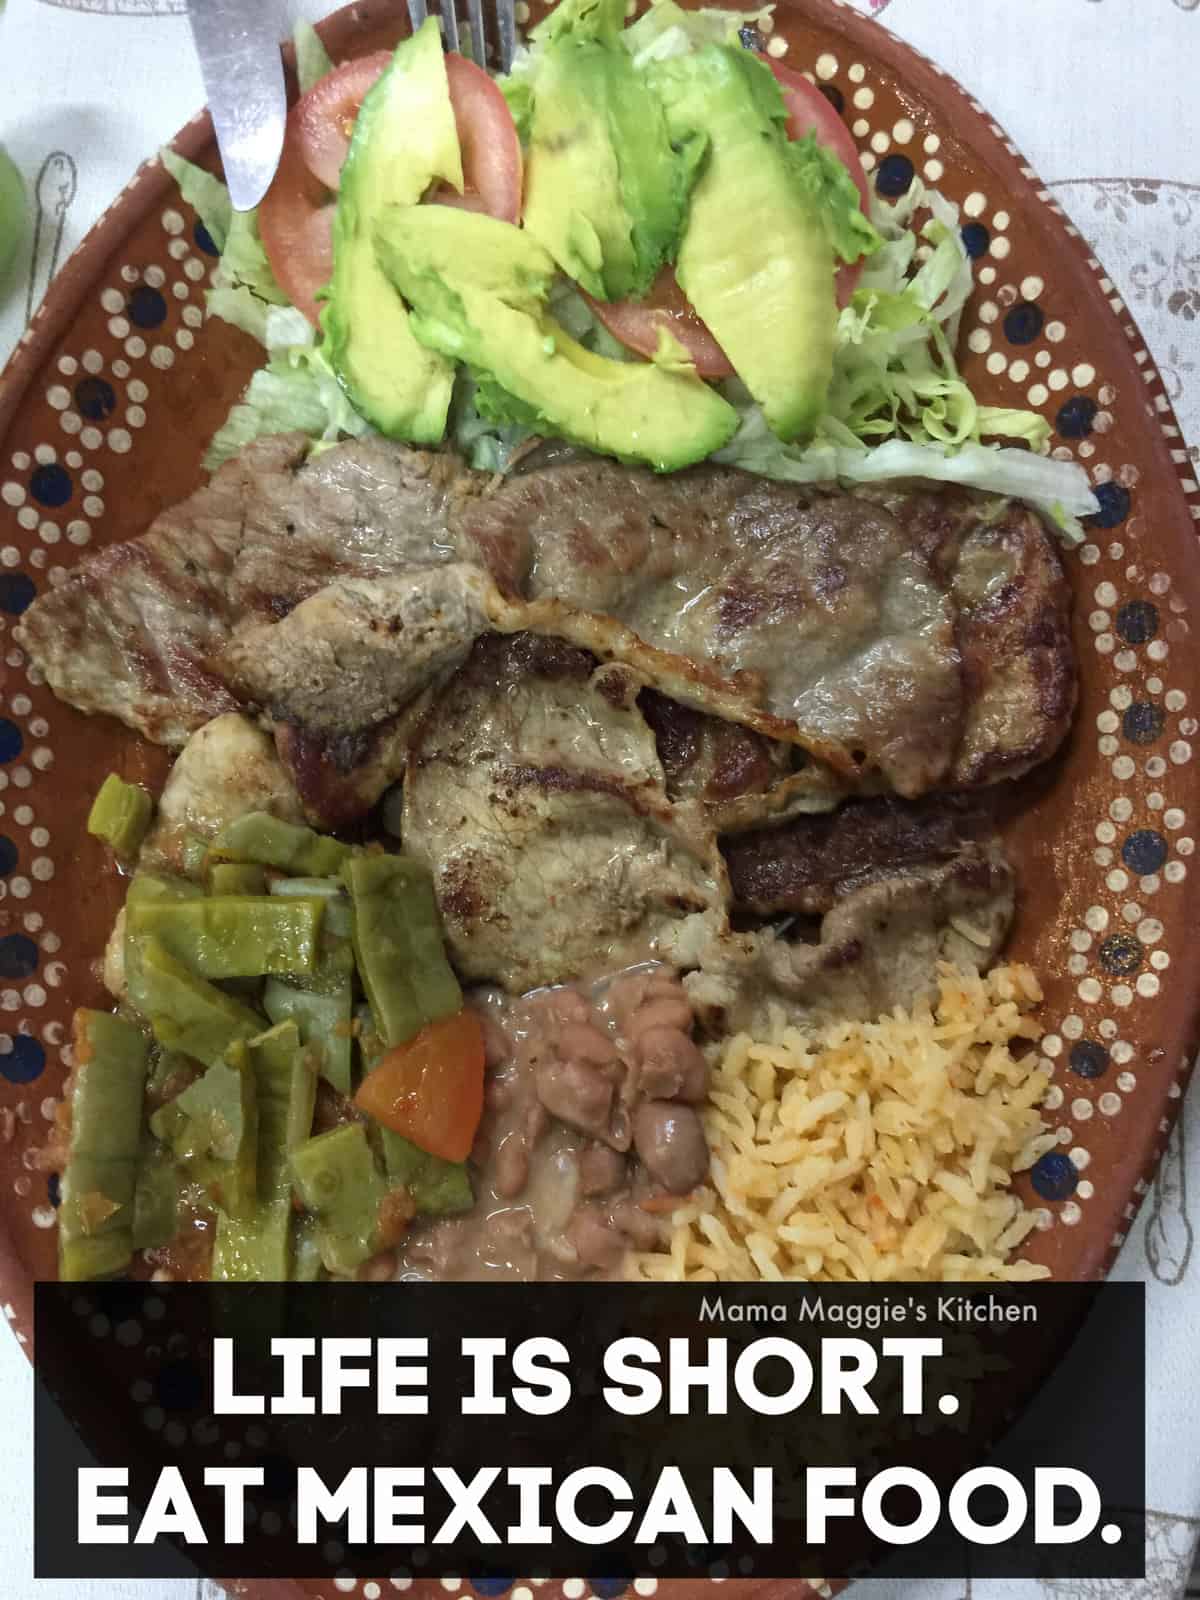 A picture of carne asada served next to rice, nopales, and avocado.